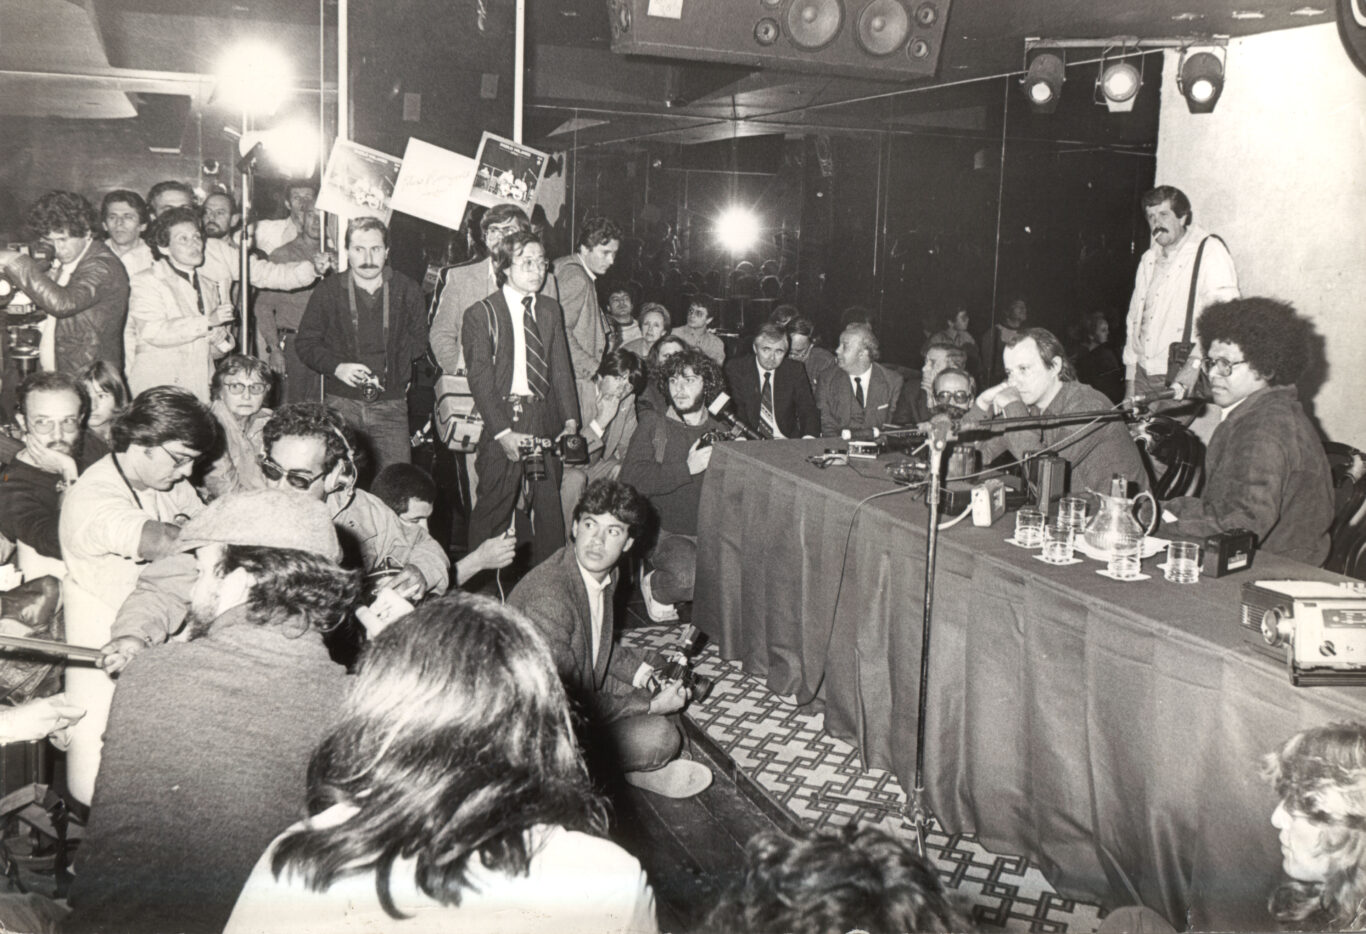 Press conference before the concerts. Photo: Personal archive of Víctor Pintos.